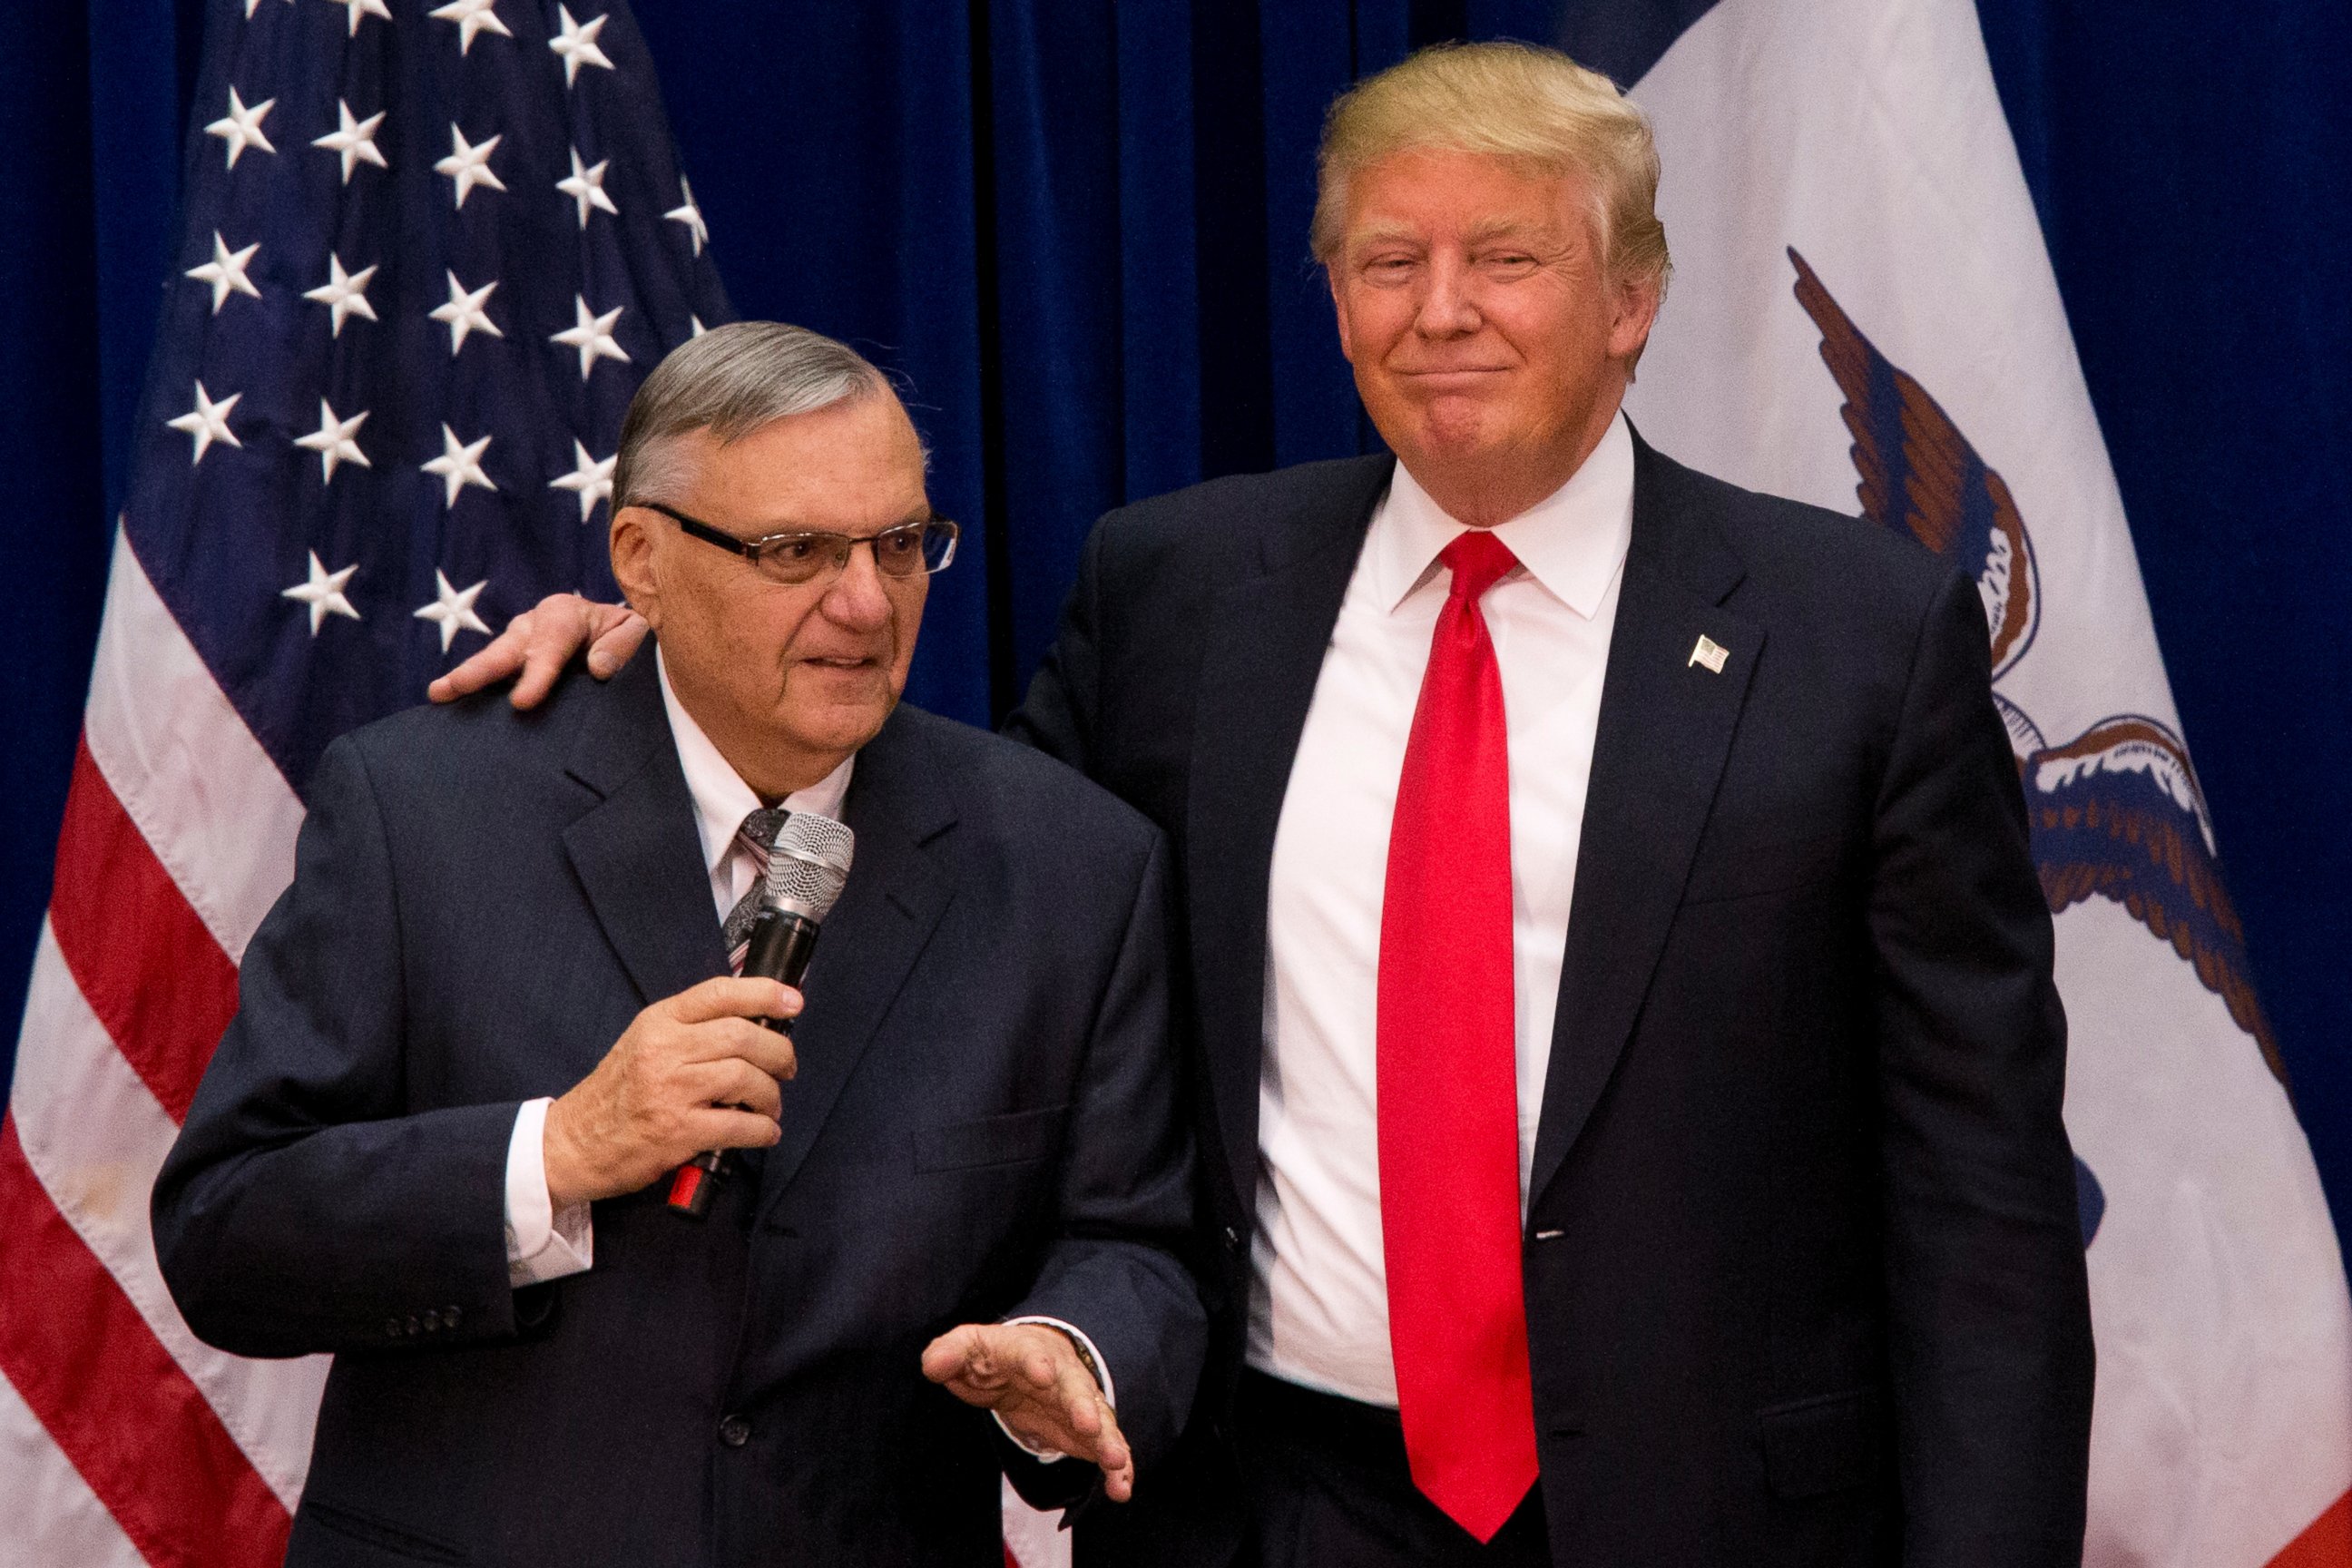 PHOTO:Donald Trump is joined by Maricopa County, Ariz., Sheriff Joe Arpaio at a campaign event at the Roundhouse Gymnasium, Jan. 26, 2016, in Marshalltown, Iowa.  